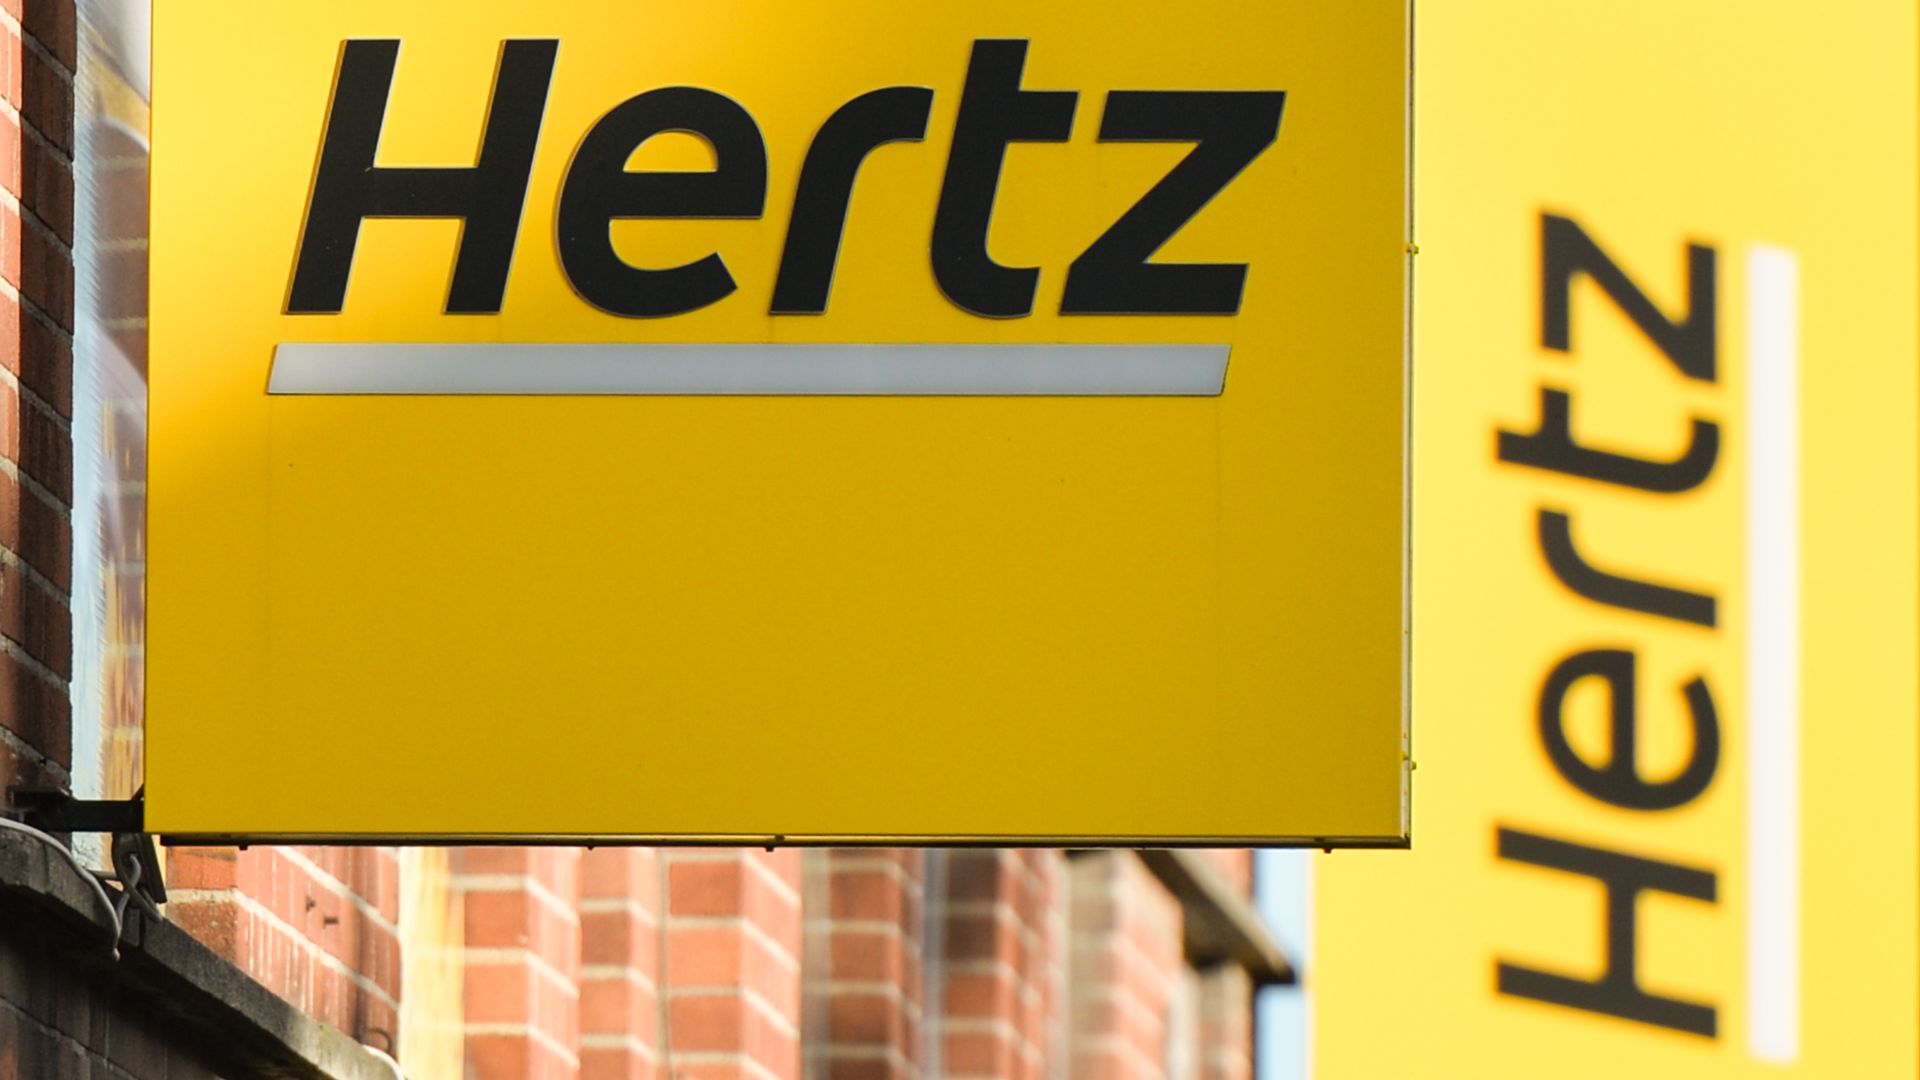 Photo of a Hertz sign outside of one of its locations in Dublin, Ireland.